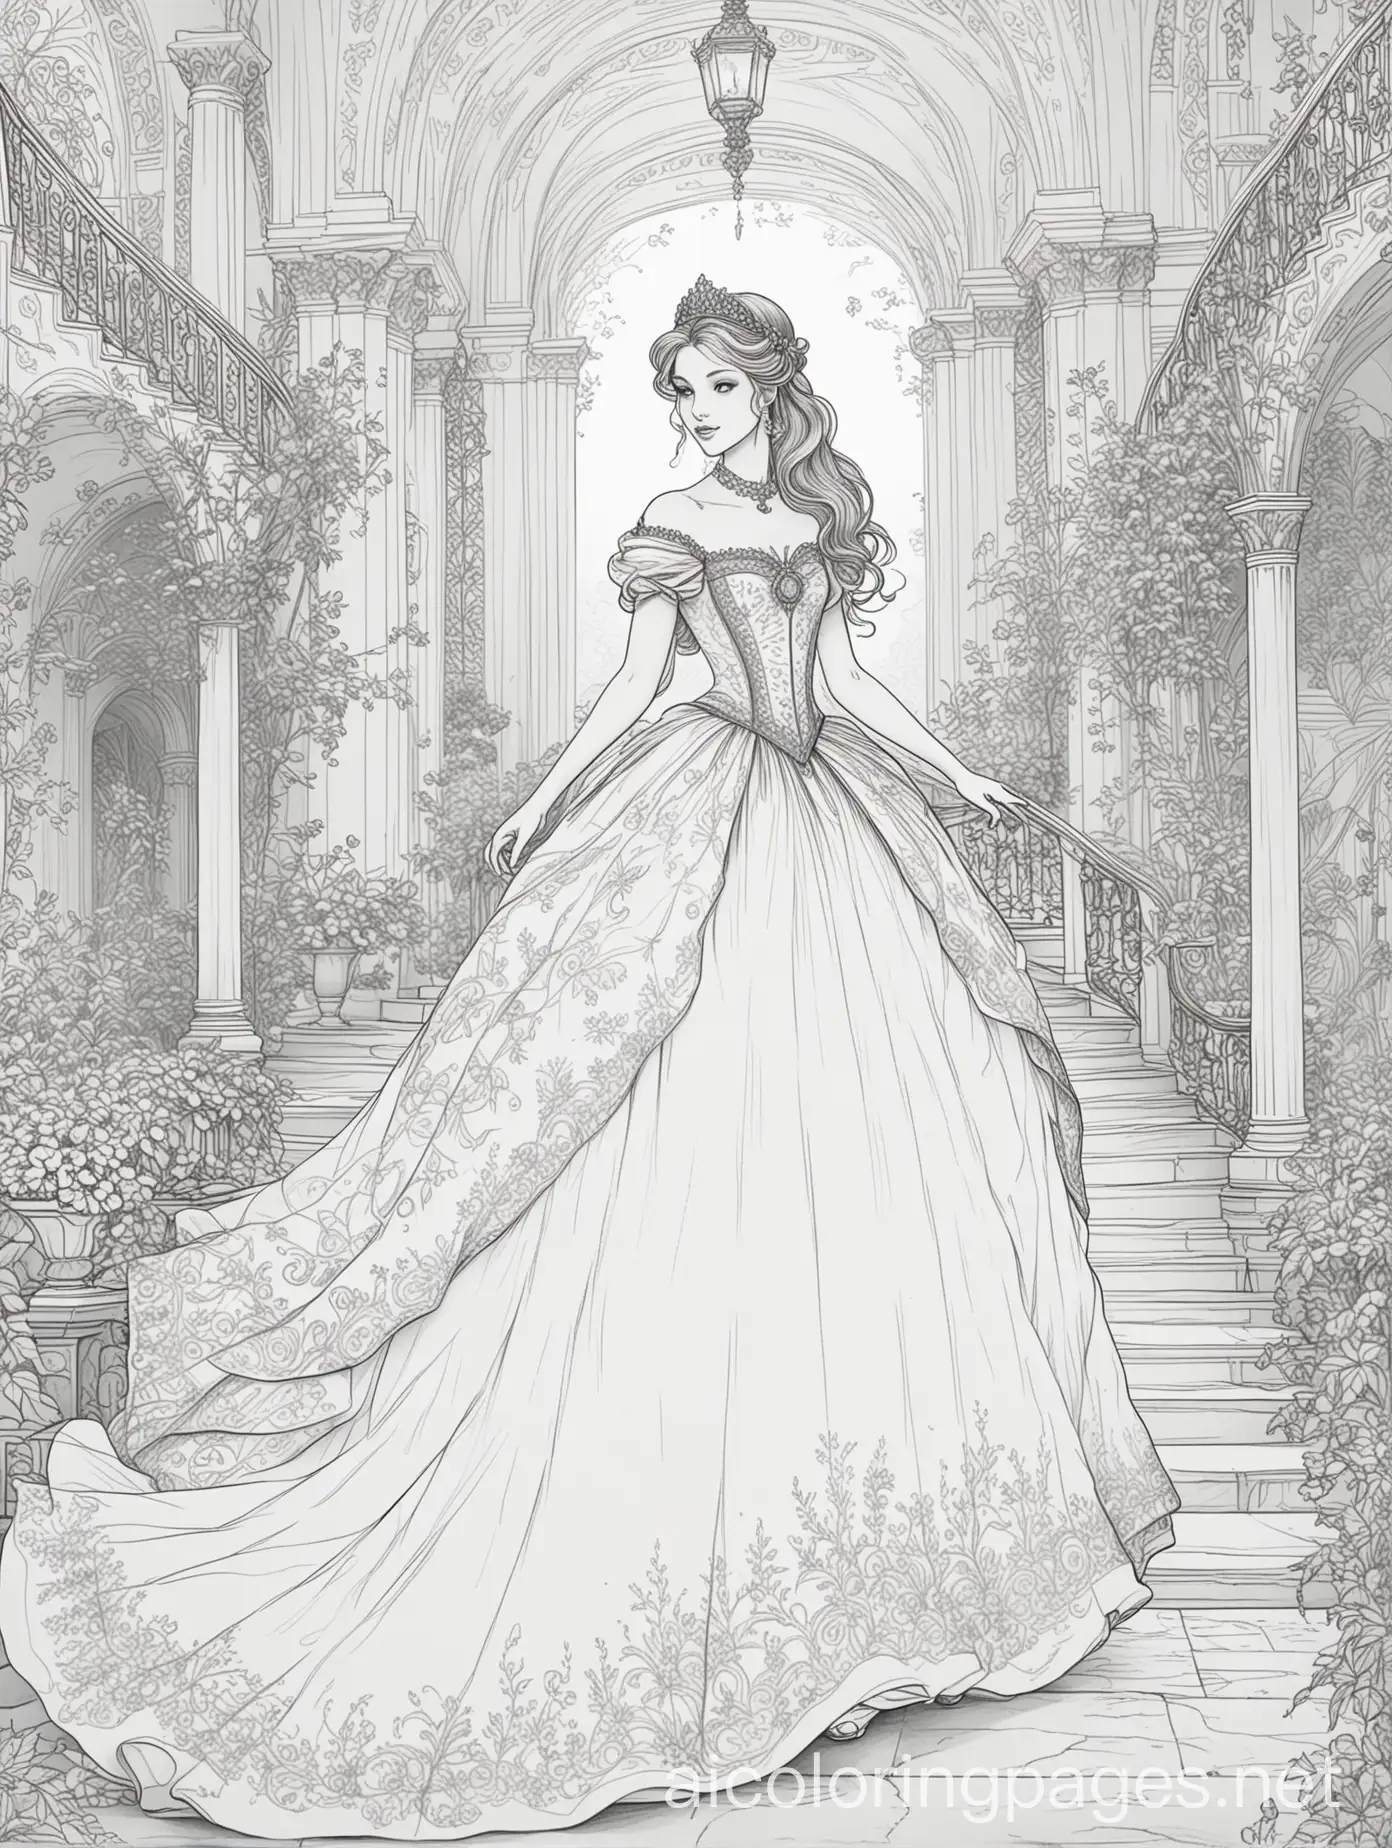 Fairy-Tale-Princess-Invited-to-Palace-Ball-Coloring-Page